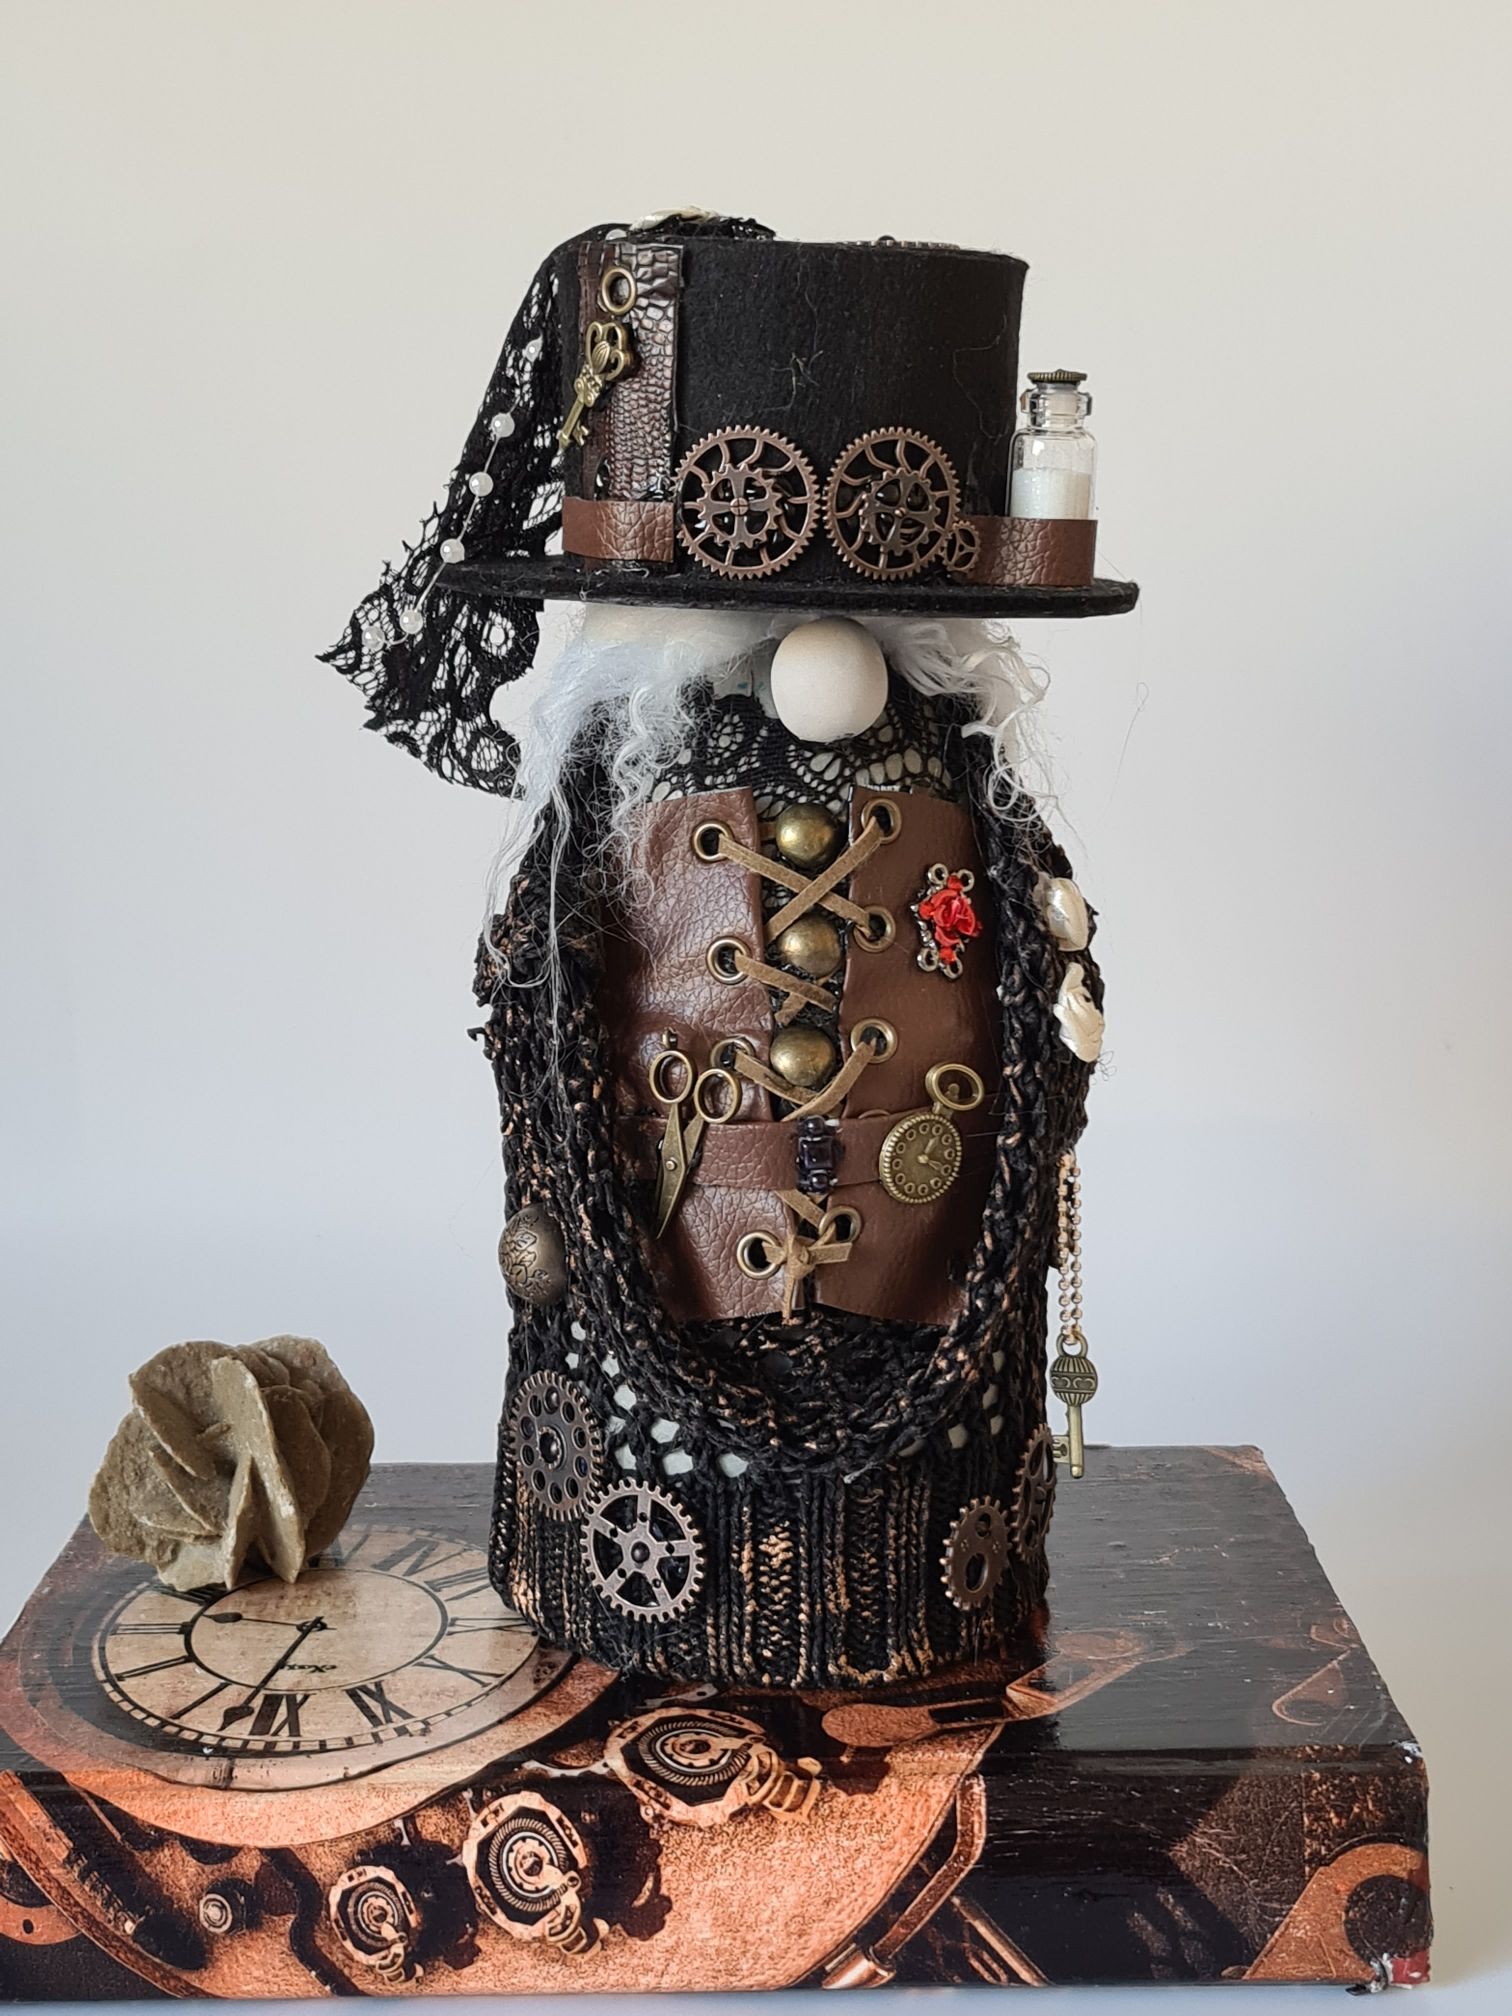 Handmade doorstop made using cement and decorated in a steampunk theme. #steampunk #cementcraft #doorstop